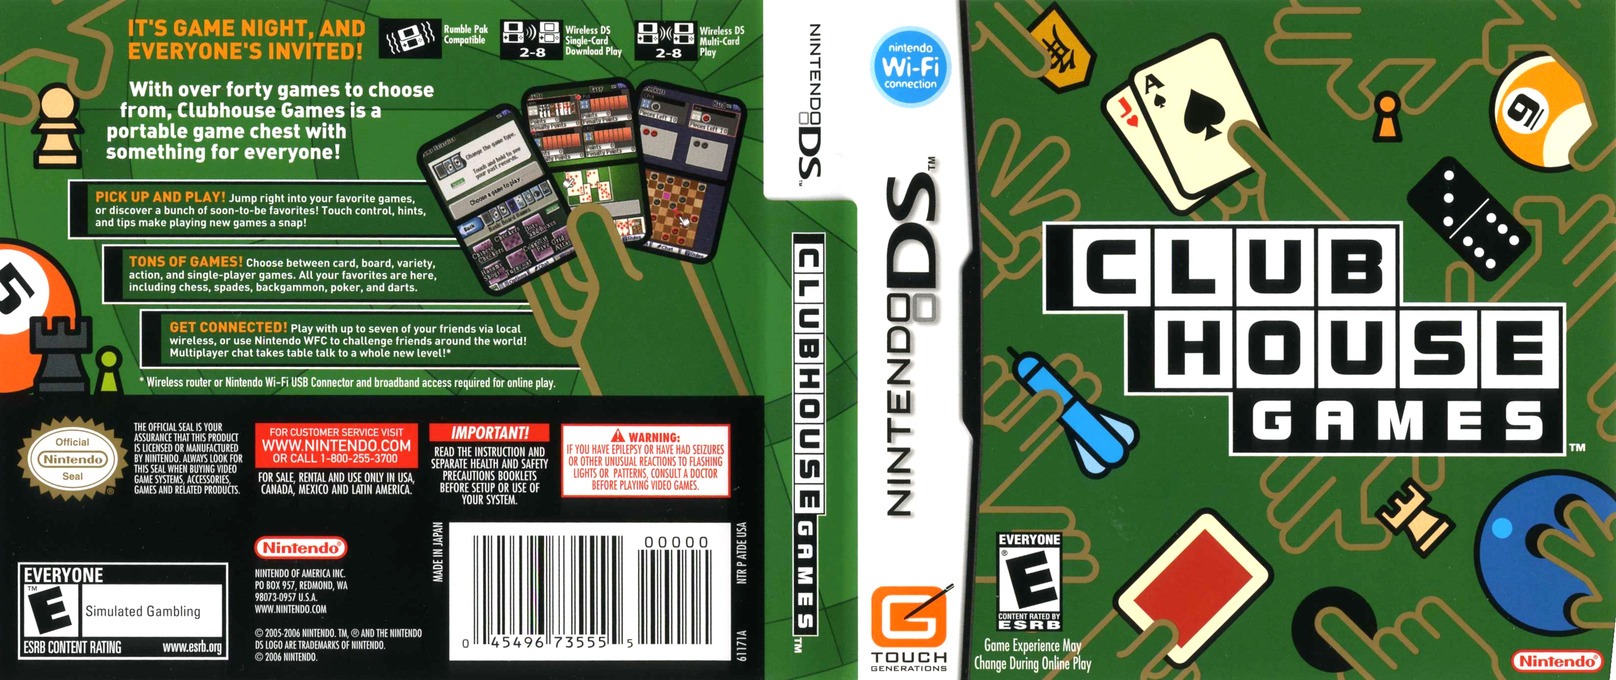 clubhouse games nintendo ds